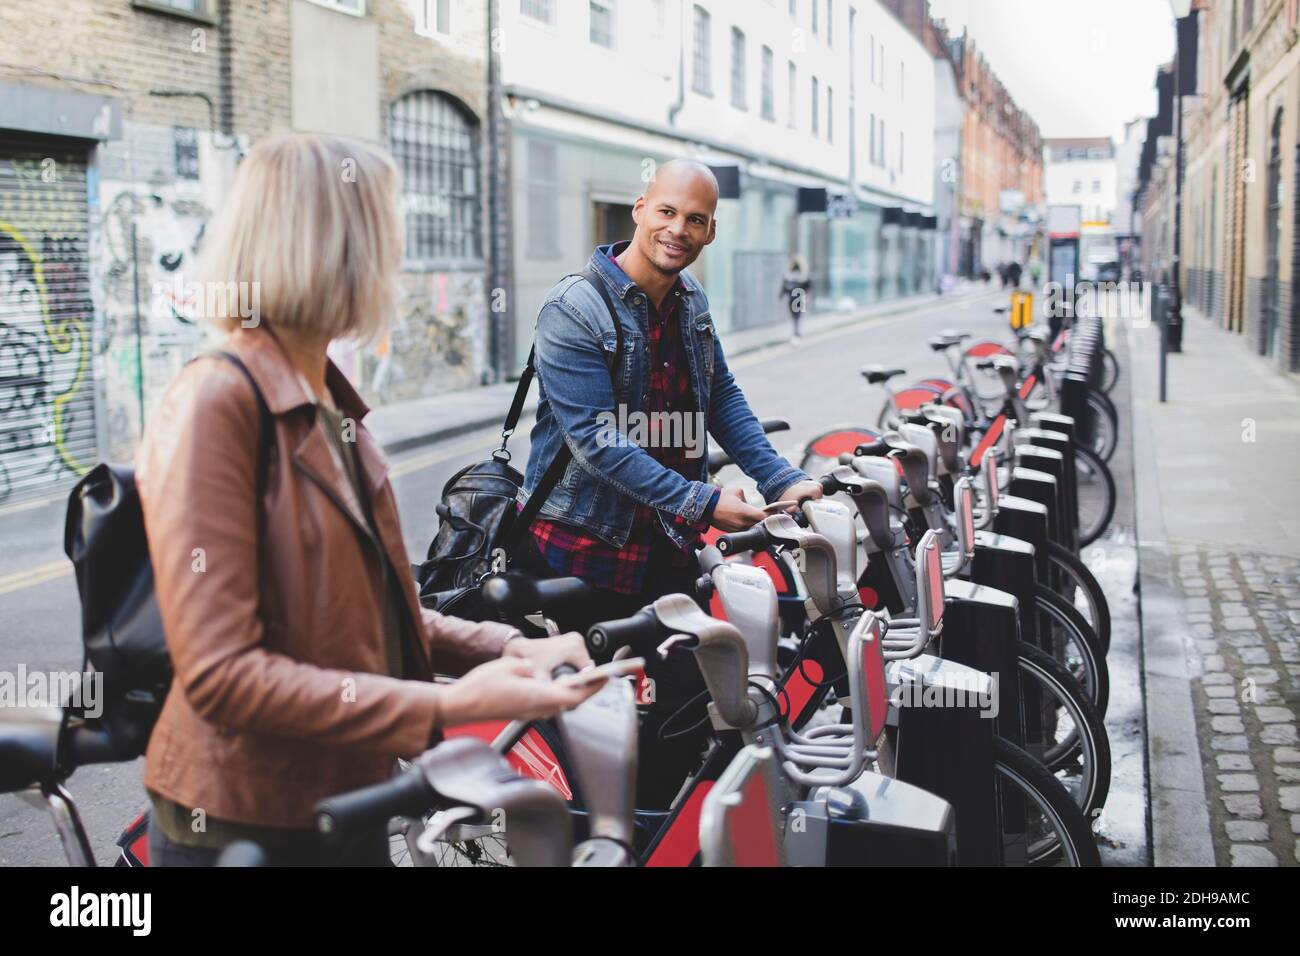 Multi-ethnic couple renting bicycles from bike share stand in city Stock Photo